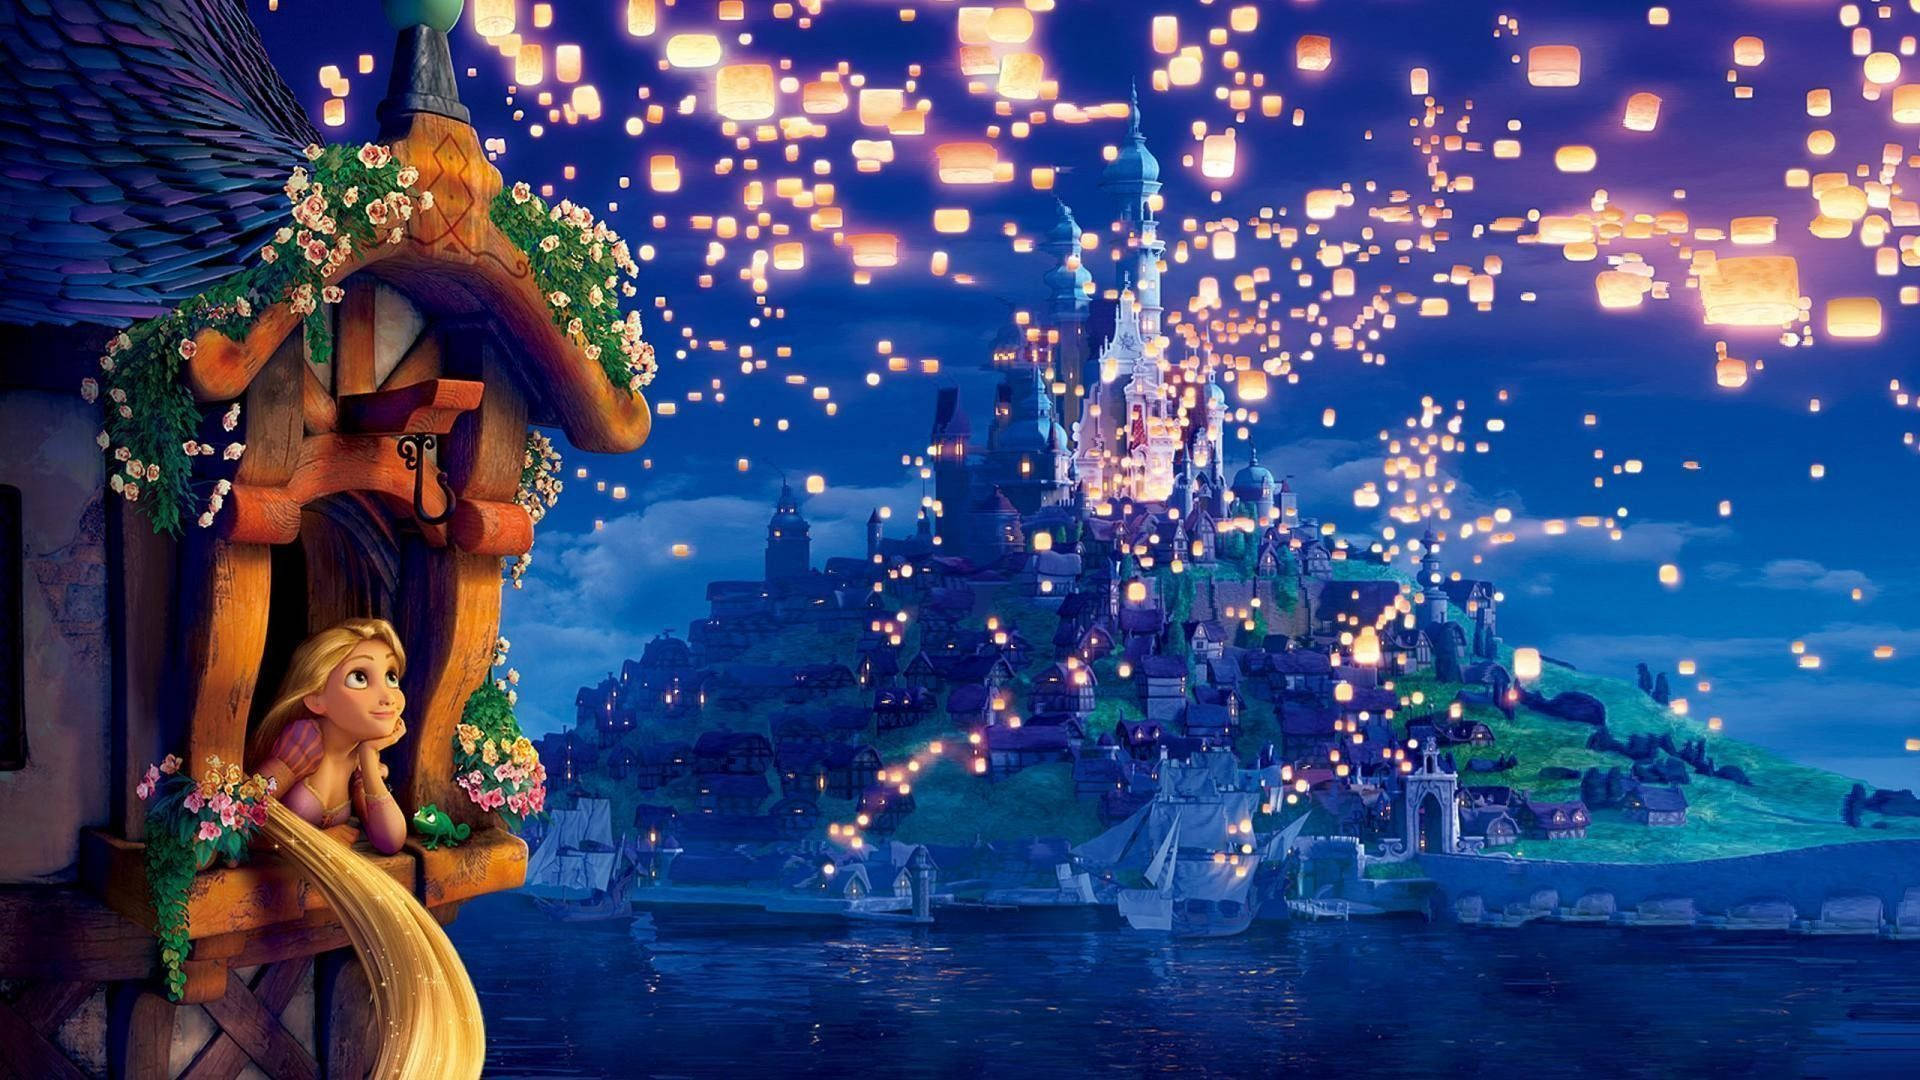 Tangled Rapunzel By The Window Background